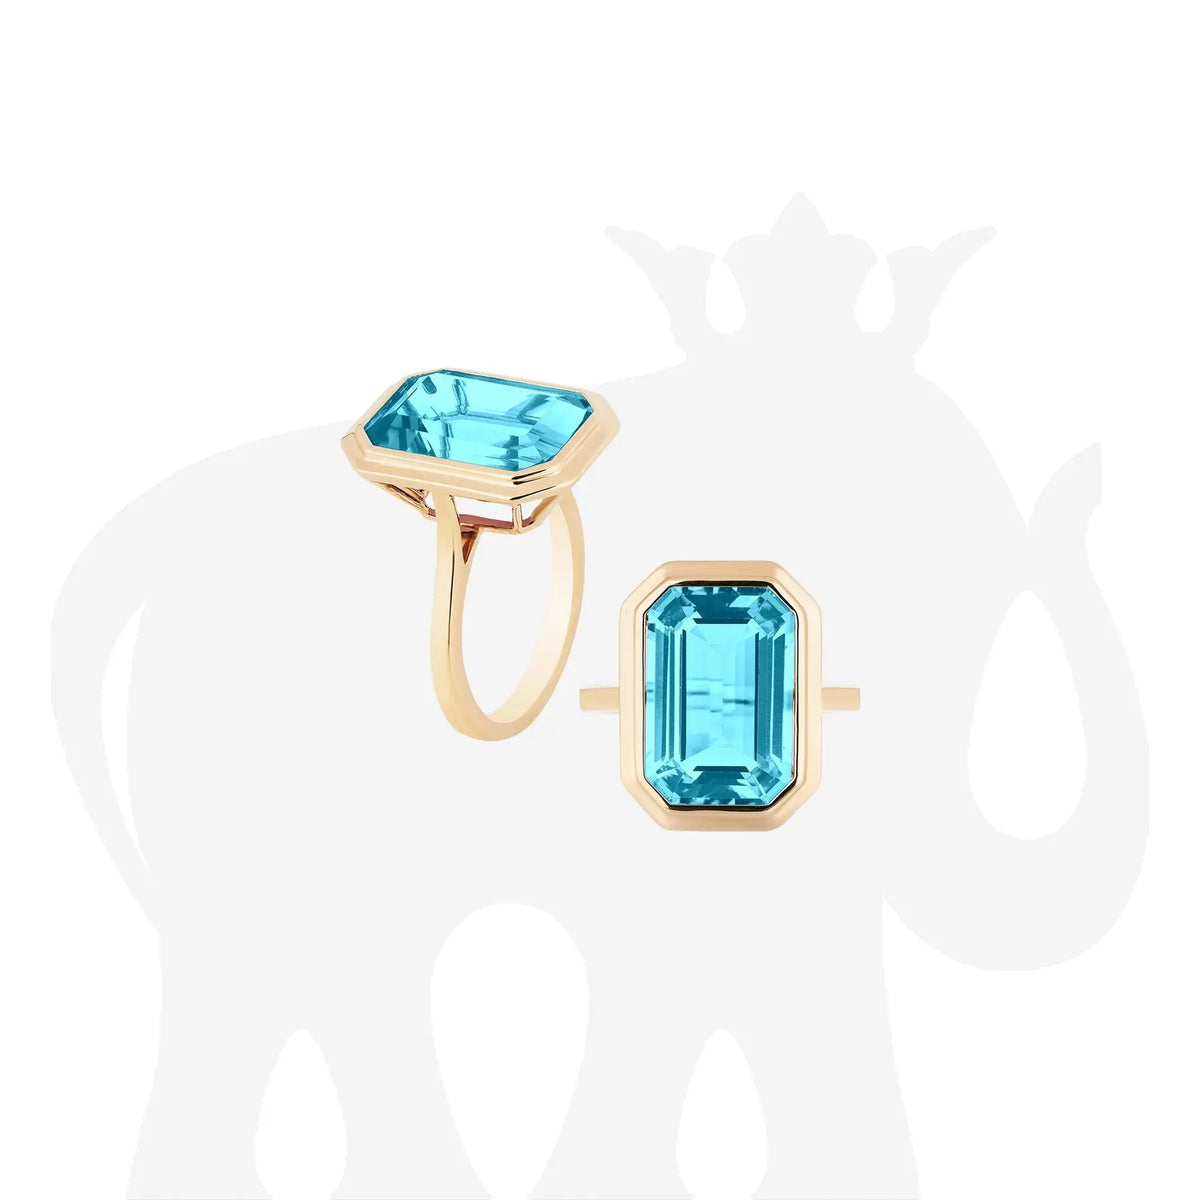 Manhattan&#39; Blue Topaz Emerald Cut Bezel Set Plain Gold Ring in 18k yellow gold. The stone size is 10x15mm. The blue topaz is 9.38 cttw.